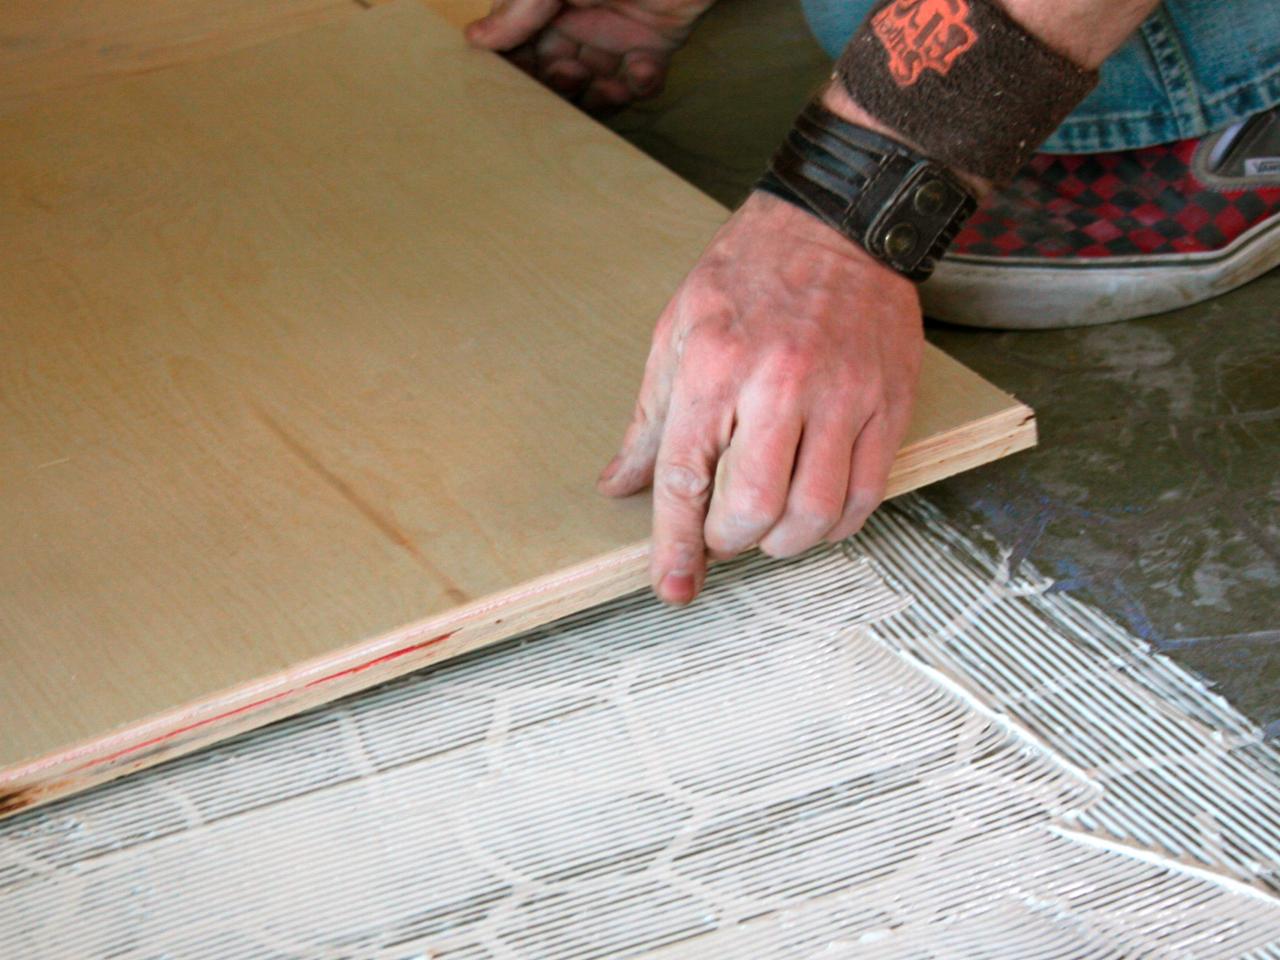 How To Install Plywood Floor Tiles, How To Tile A Bathroom Floor Over Plywood